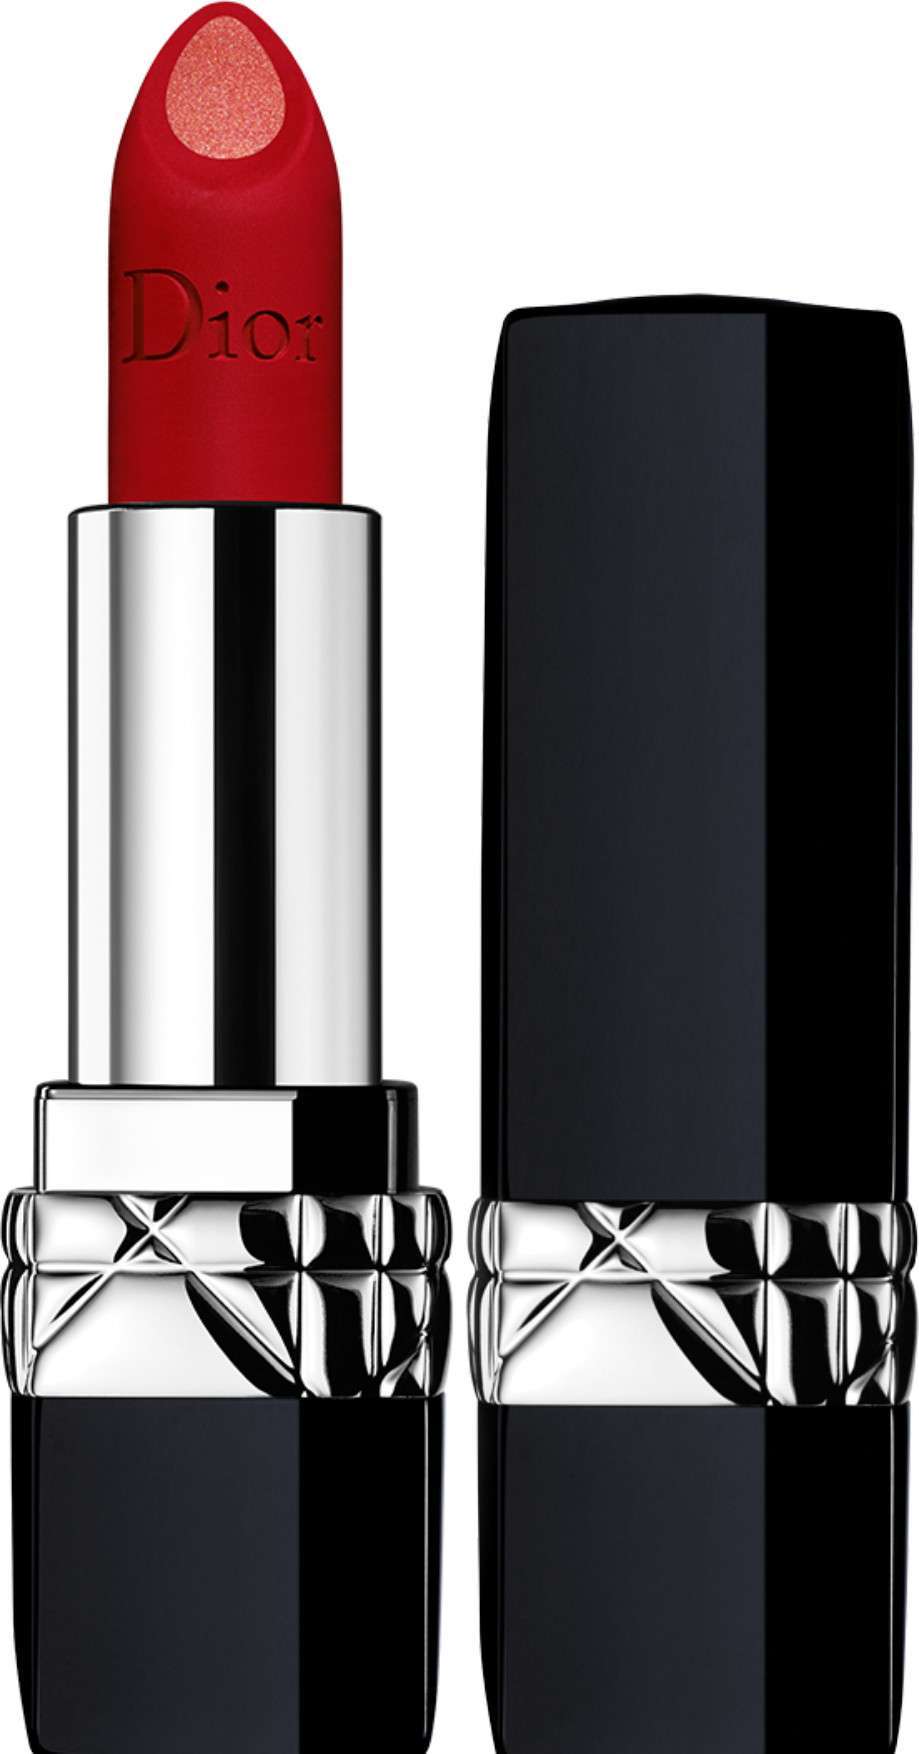 dior double rouge 999